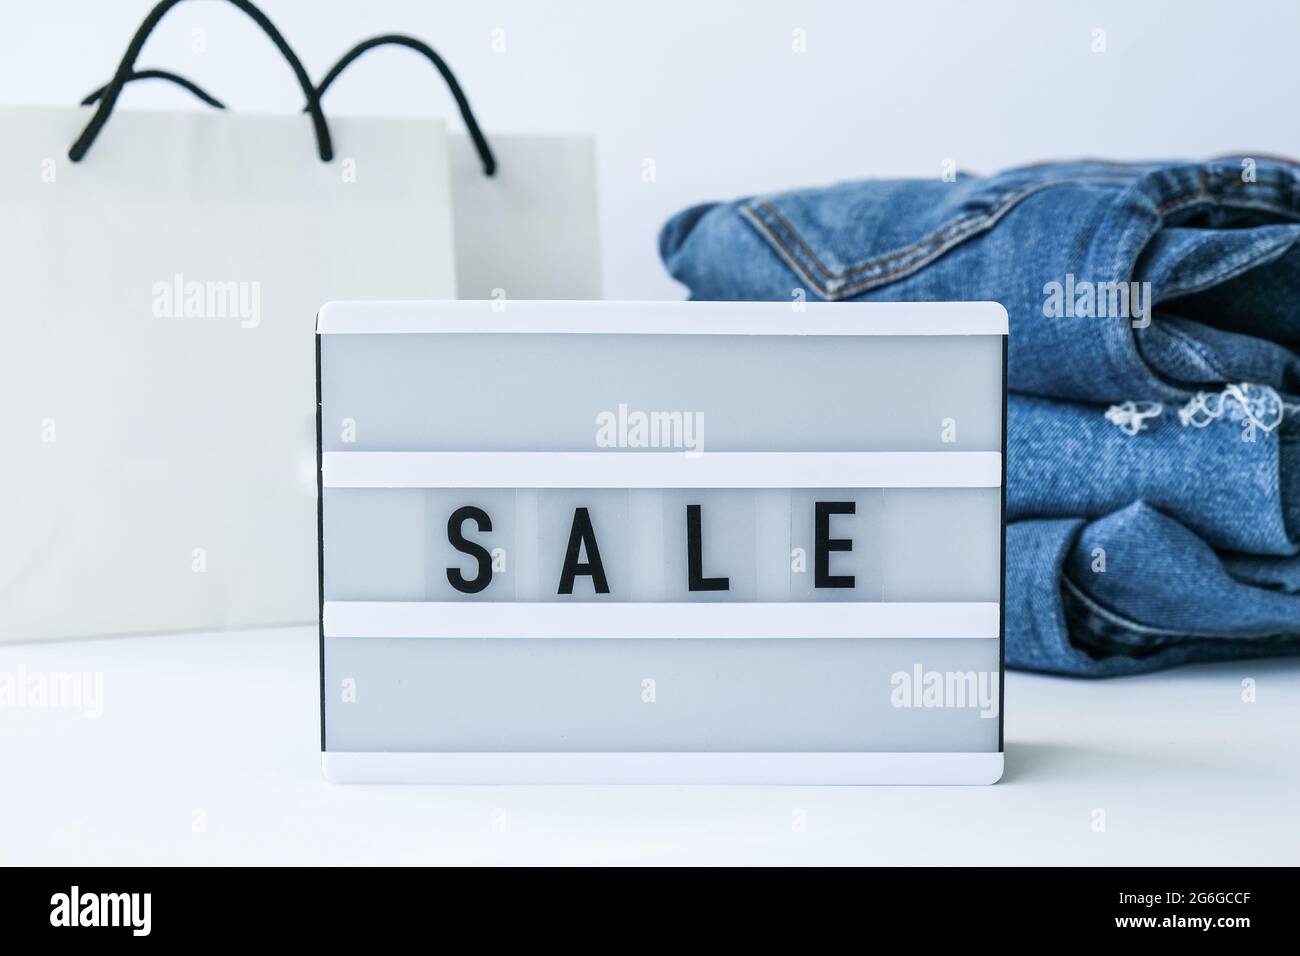 Light board with text SALE with paper shopping bags, jeans clothes. Big Sale online shopping concept. Promotion advertising. Holiday Stock Photo